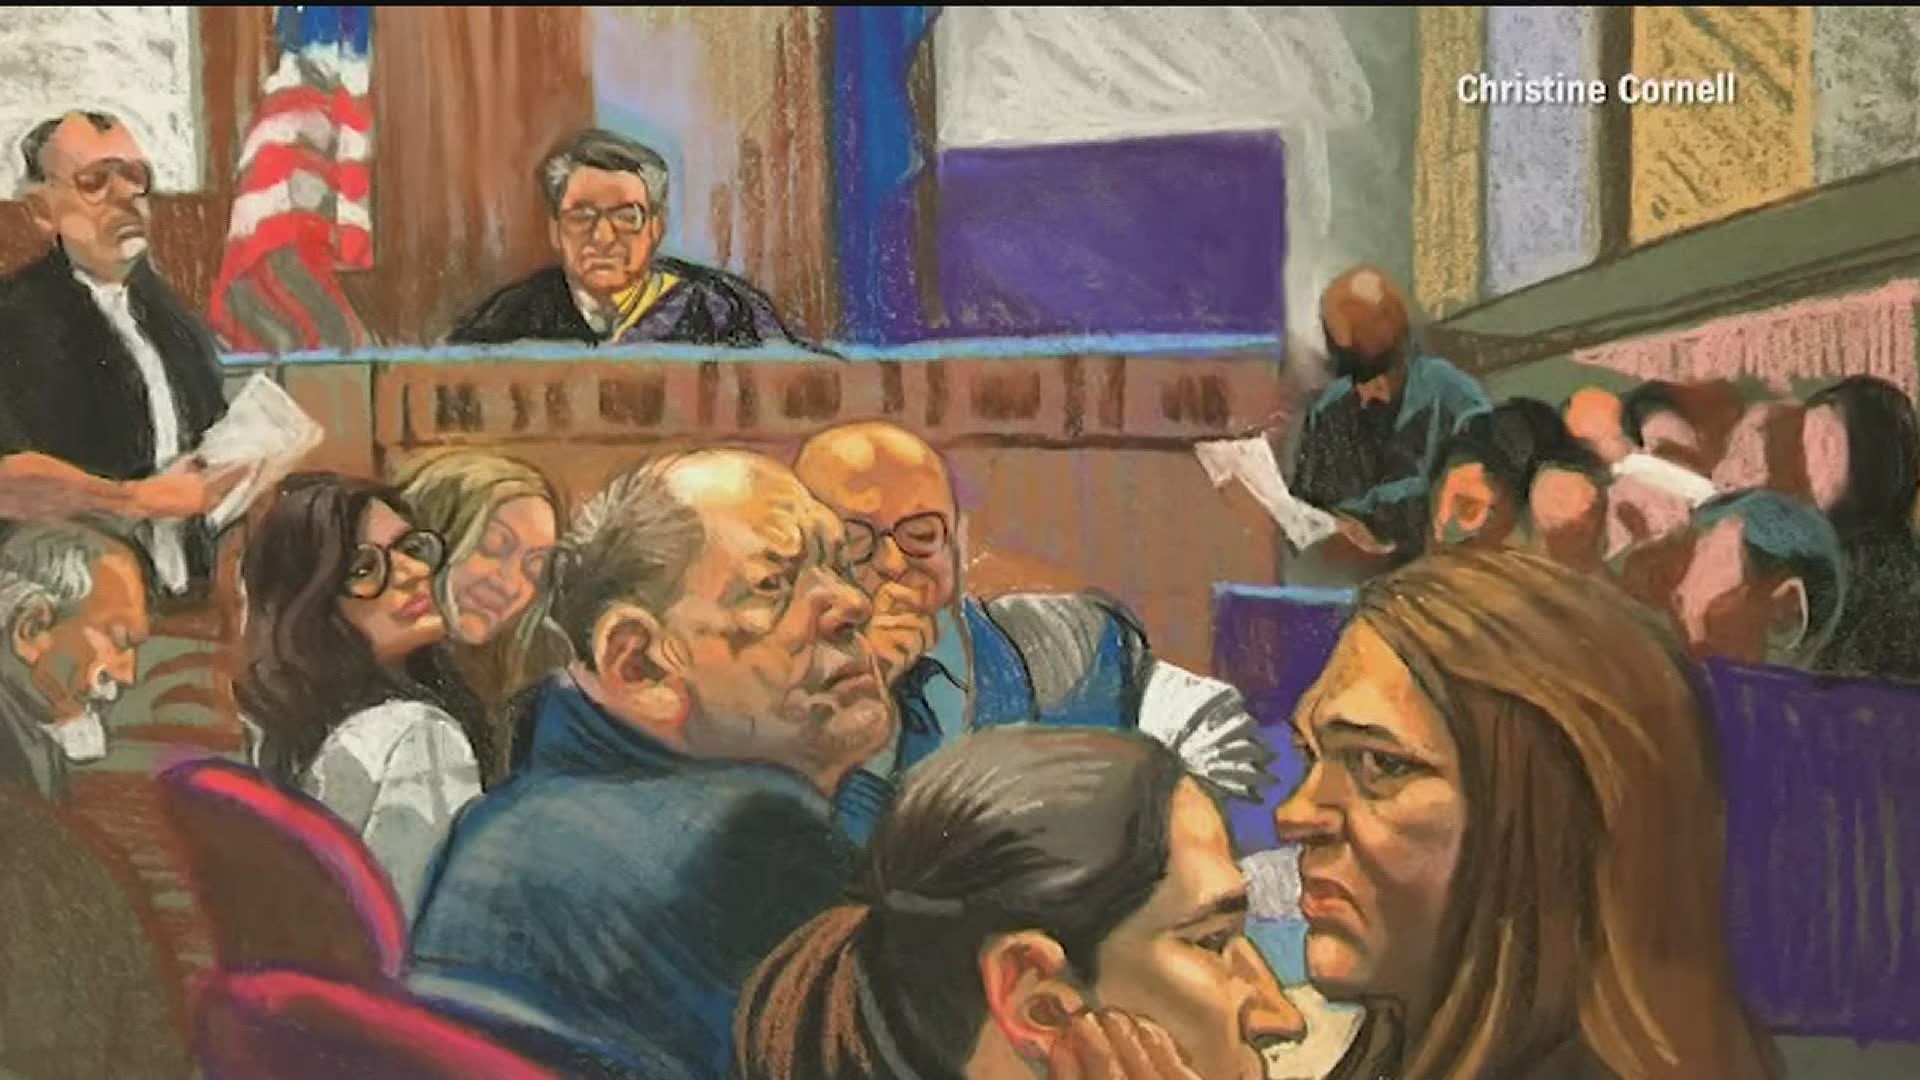 While Harvey Weinstein was convicted of third-degree rape and criminal sex act, the jury found him not guilty on the most serious charges.